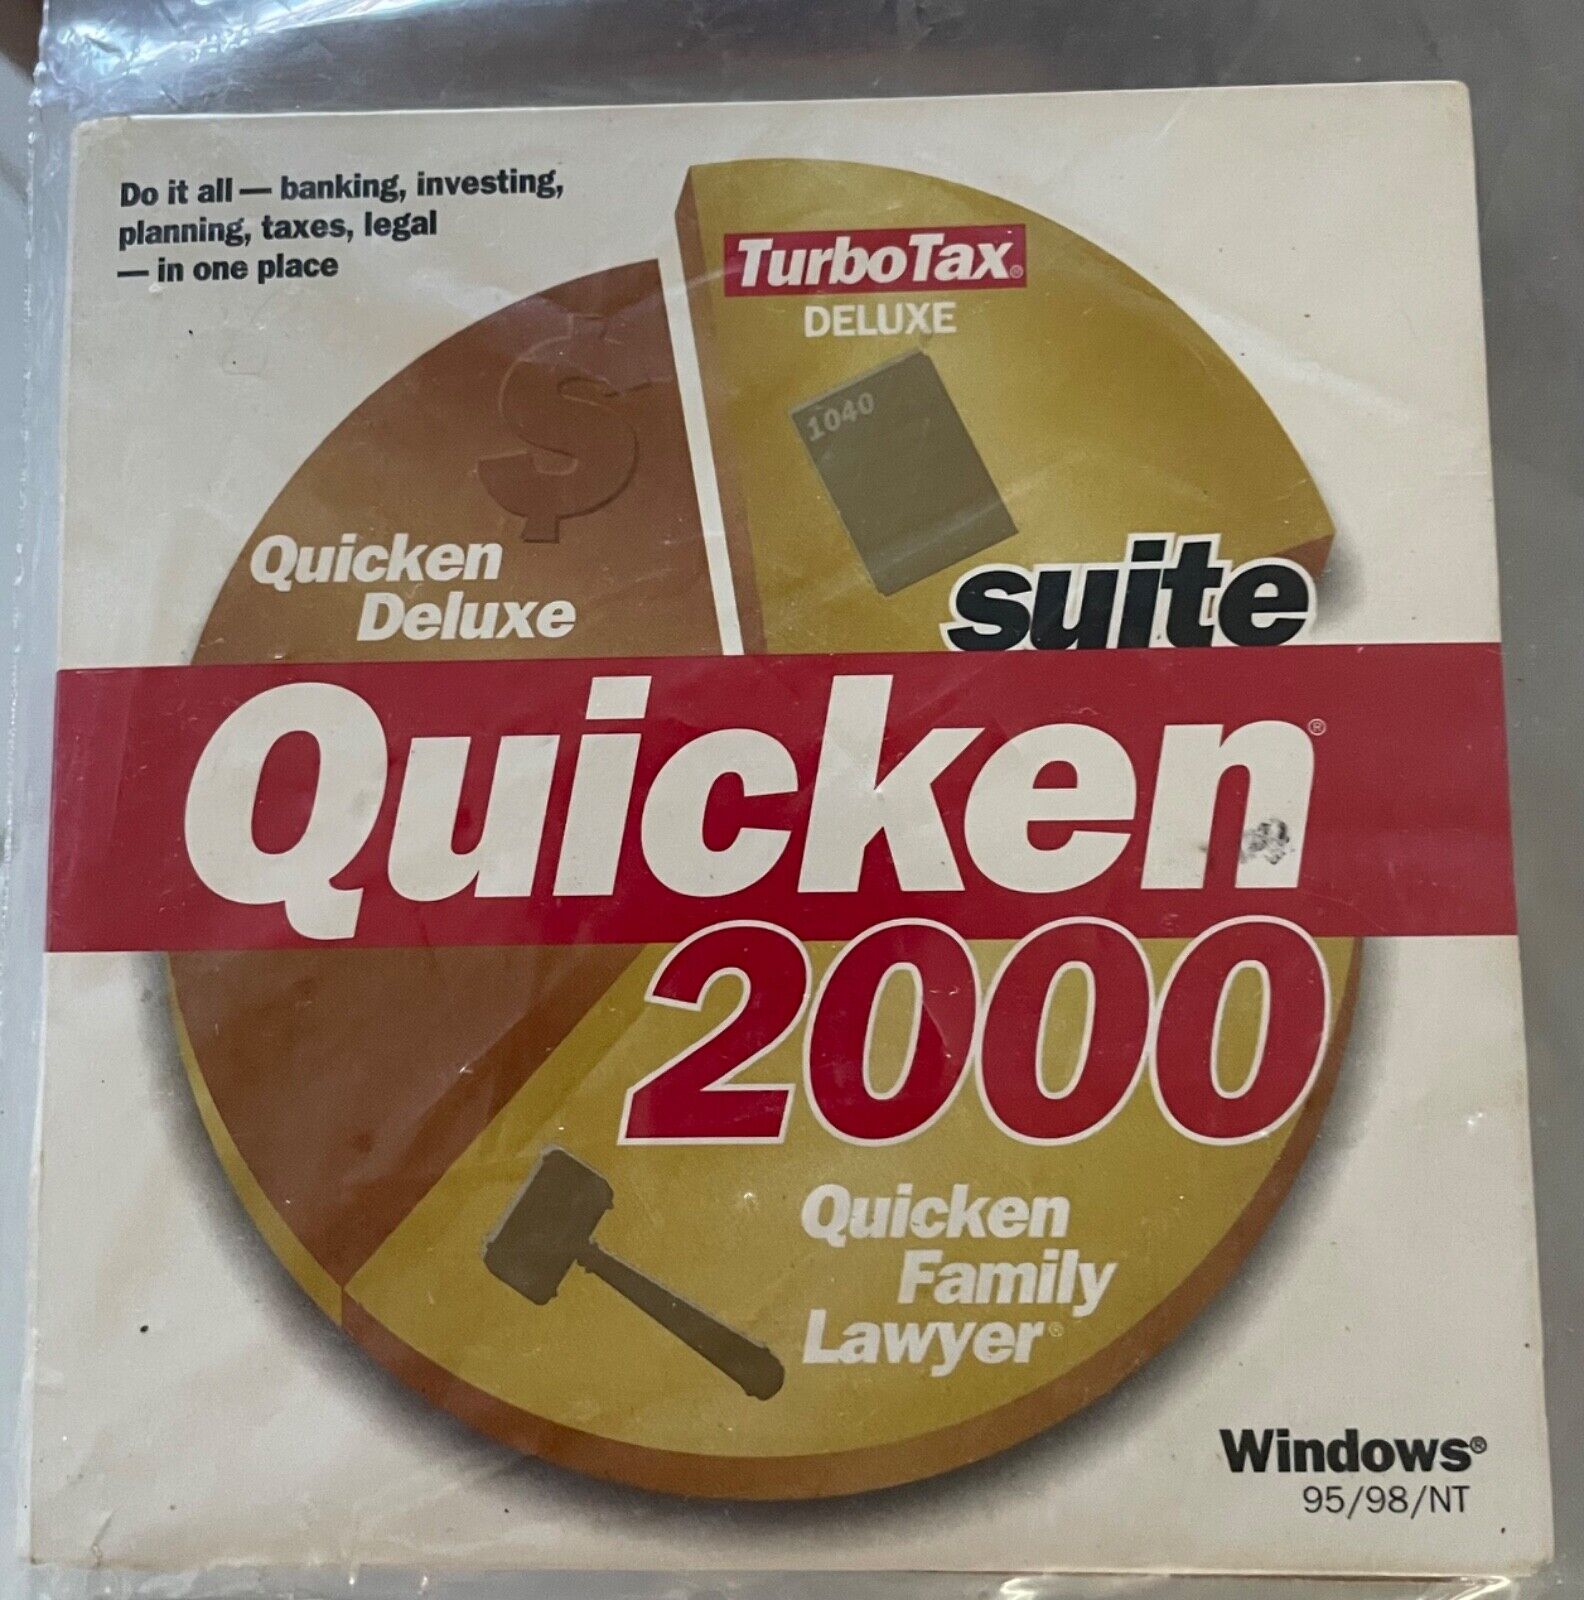 QUICKEN DELUXE 2000 Suite for Windows (Quicken, TurboTax and Lawyer)